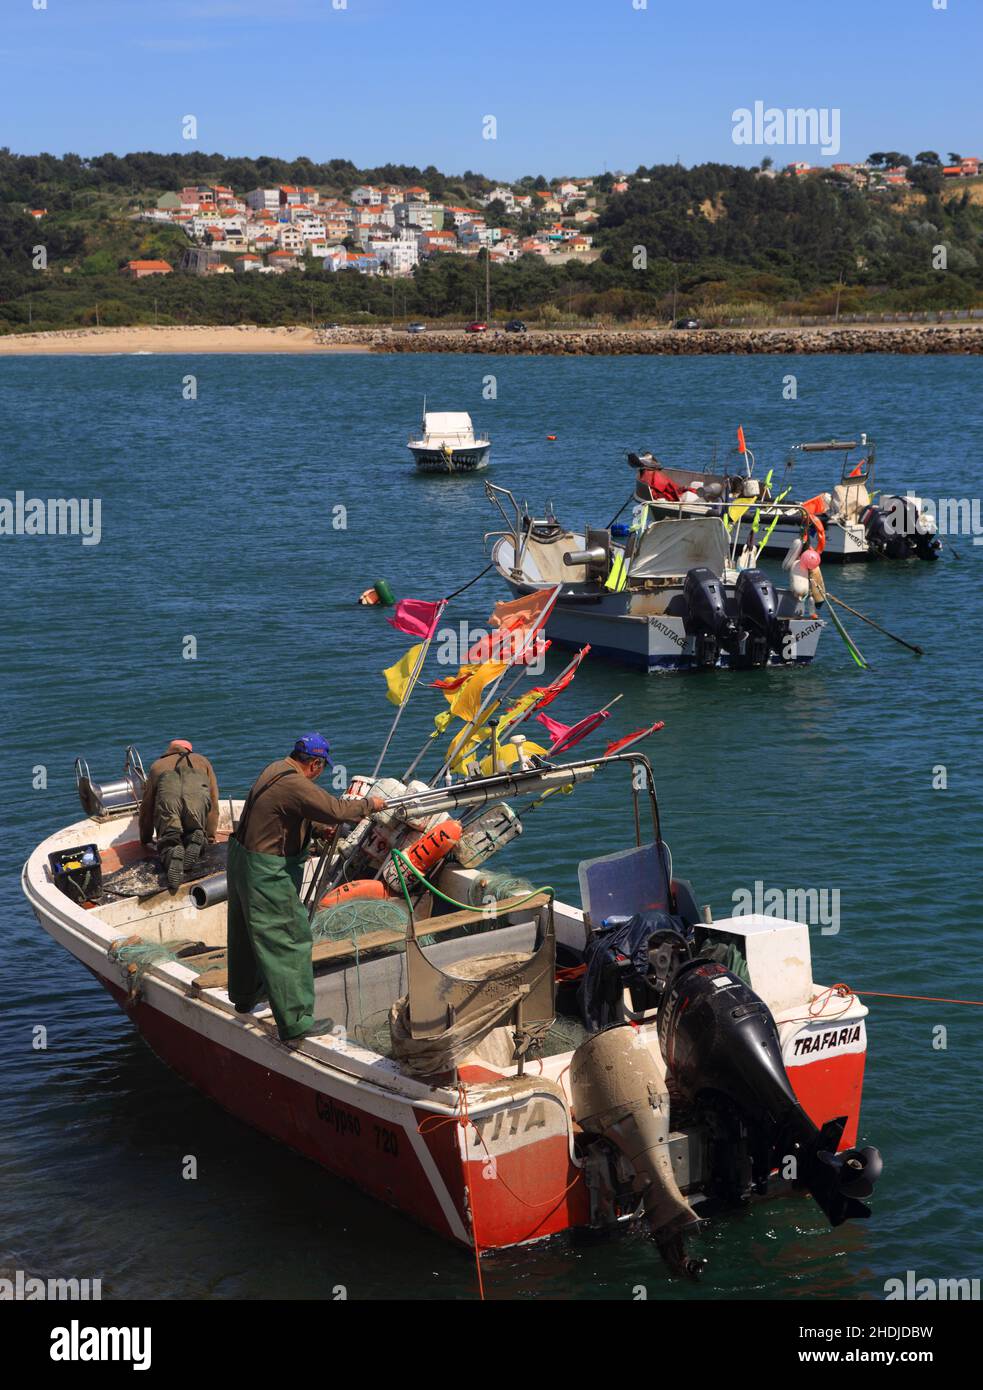 A crew of coastal fishermen prepare their boat for sea in the tiny port of Traferia, on the Tagus River estuary. On April Stock Photo